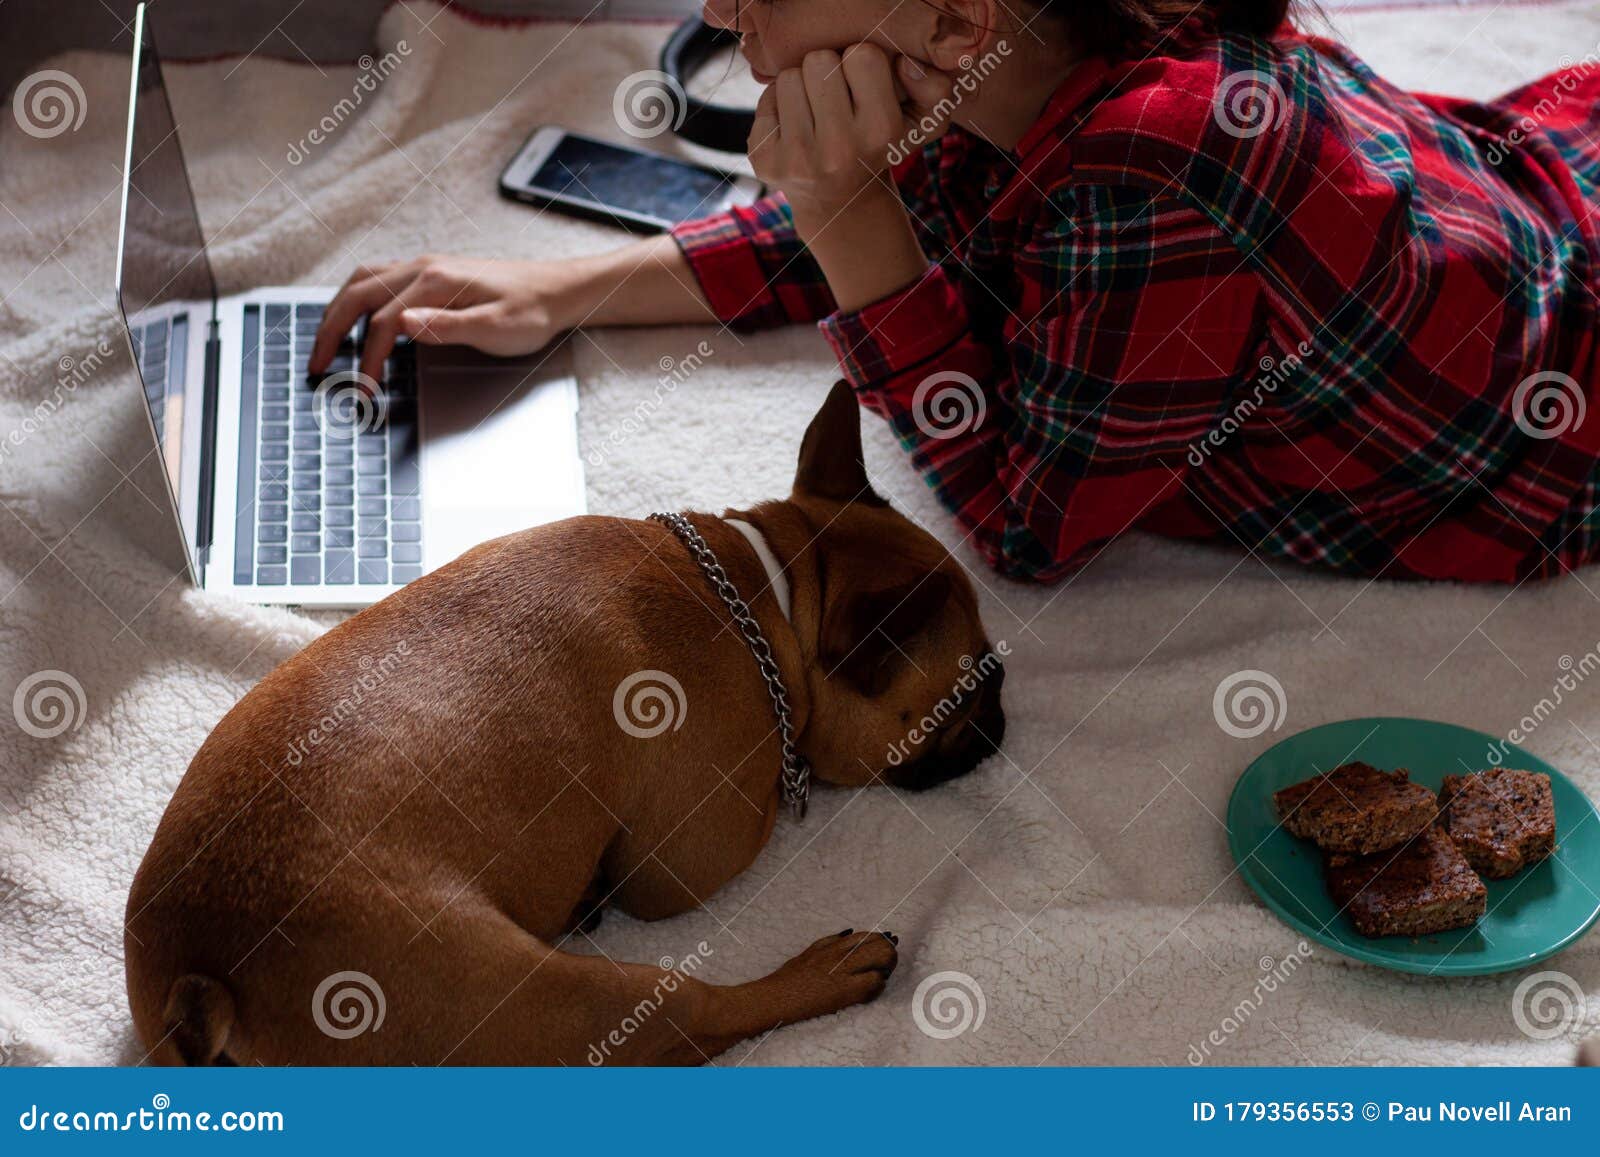 young woman in pijama using laptop with french bulldog next to her